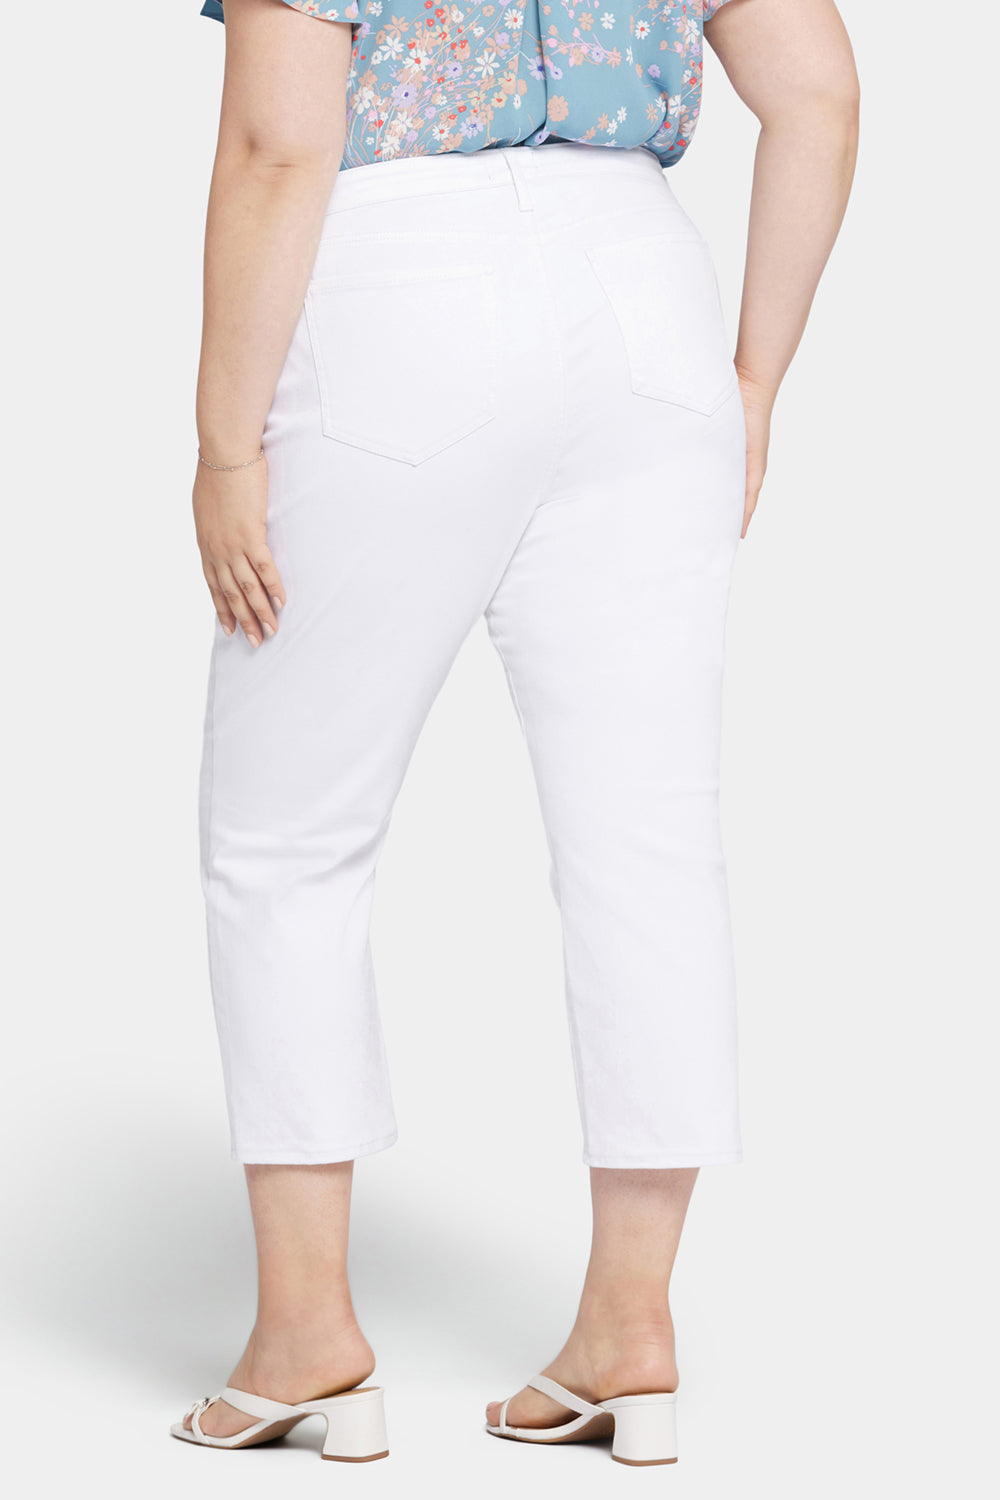 NYDJ Relaxed Piper Crop Jeans In Plus Size In Cool Embrace® Denim - Optic White